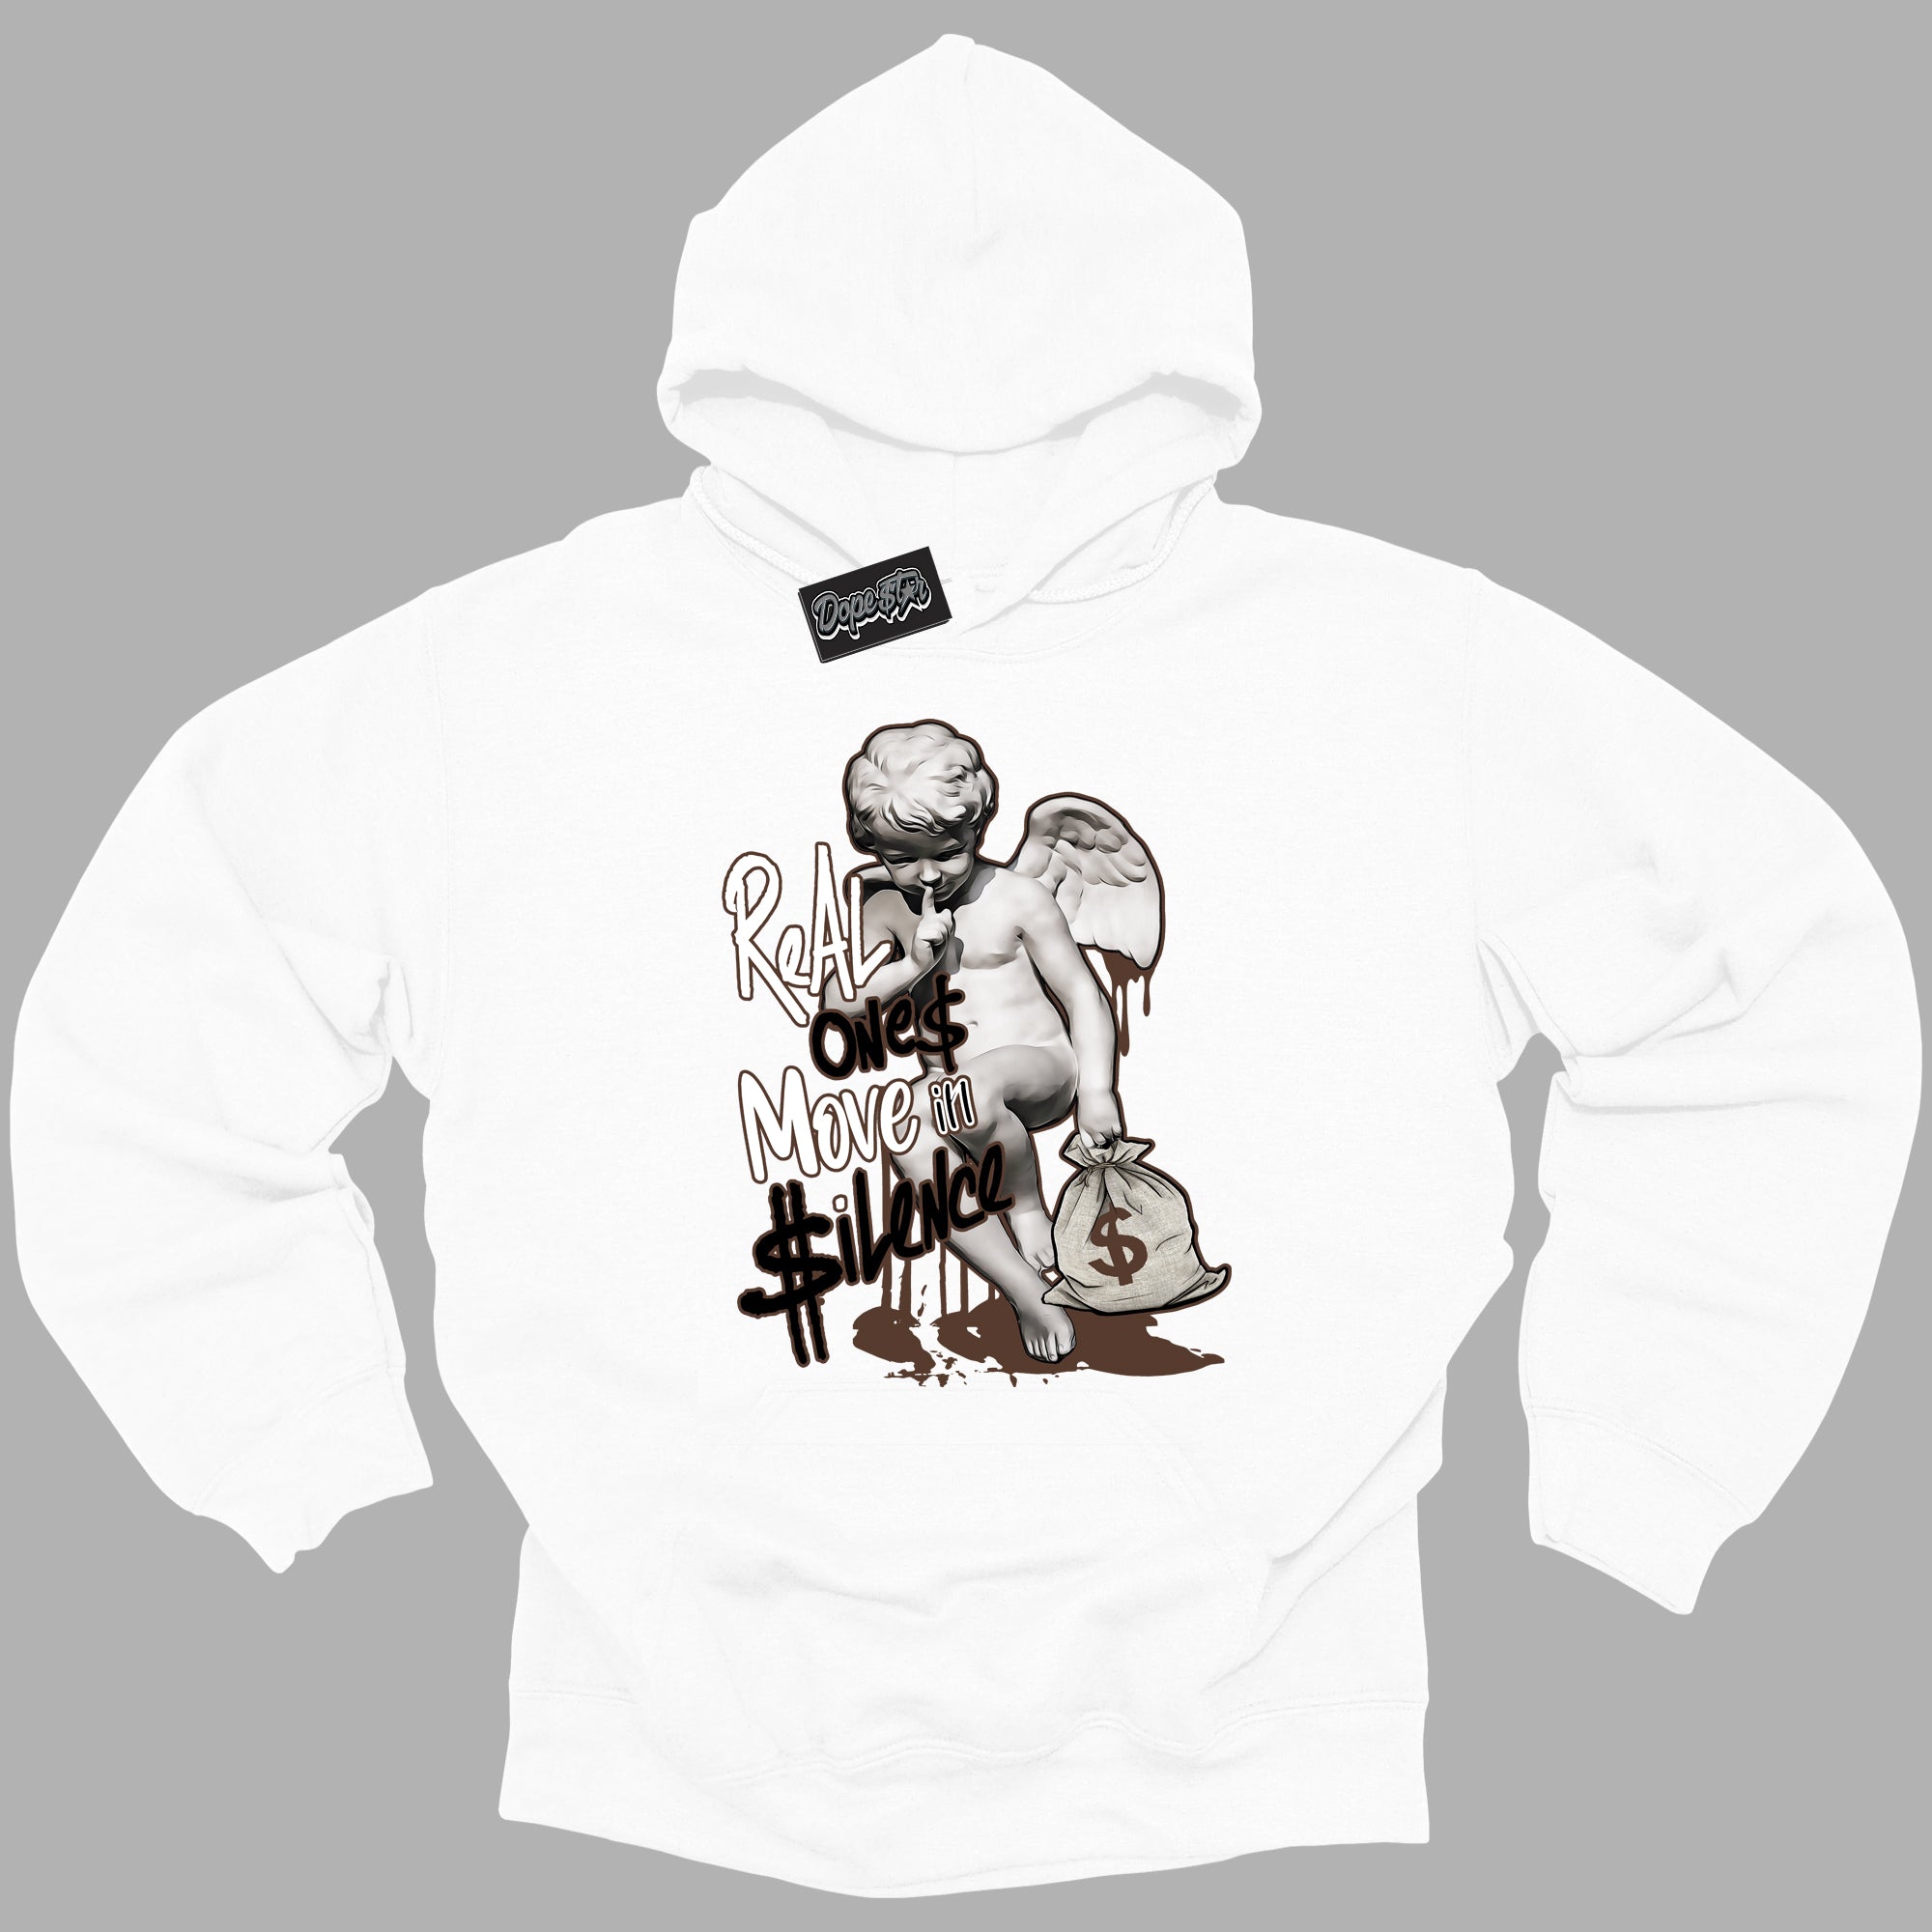 Cool White Graphic DopeStar Hoodie with “ Real Ones Cherub “ print, that perfectly matches Palomino 1s sneakers